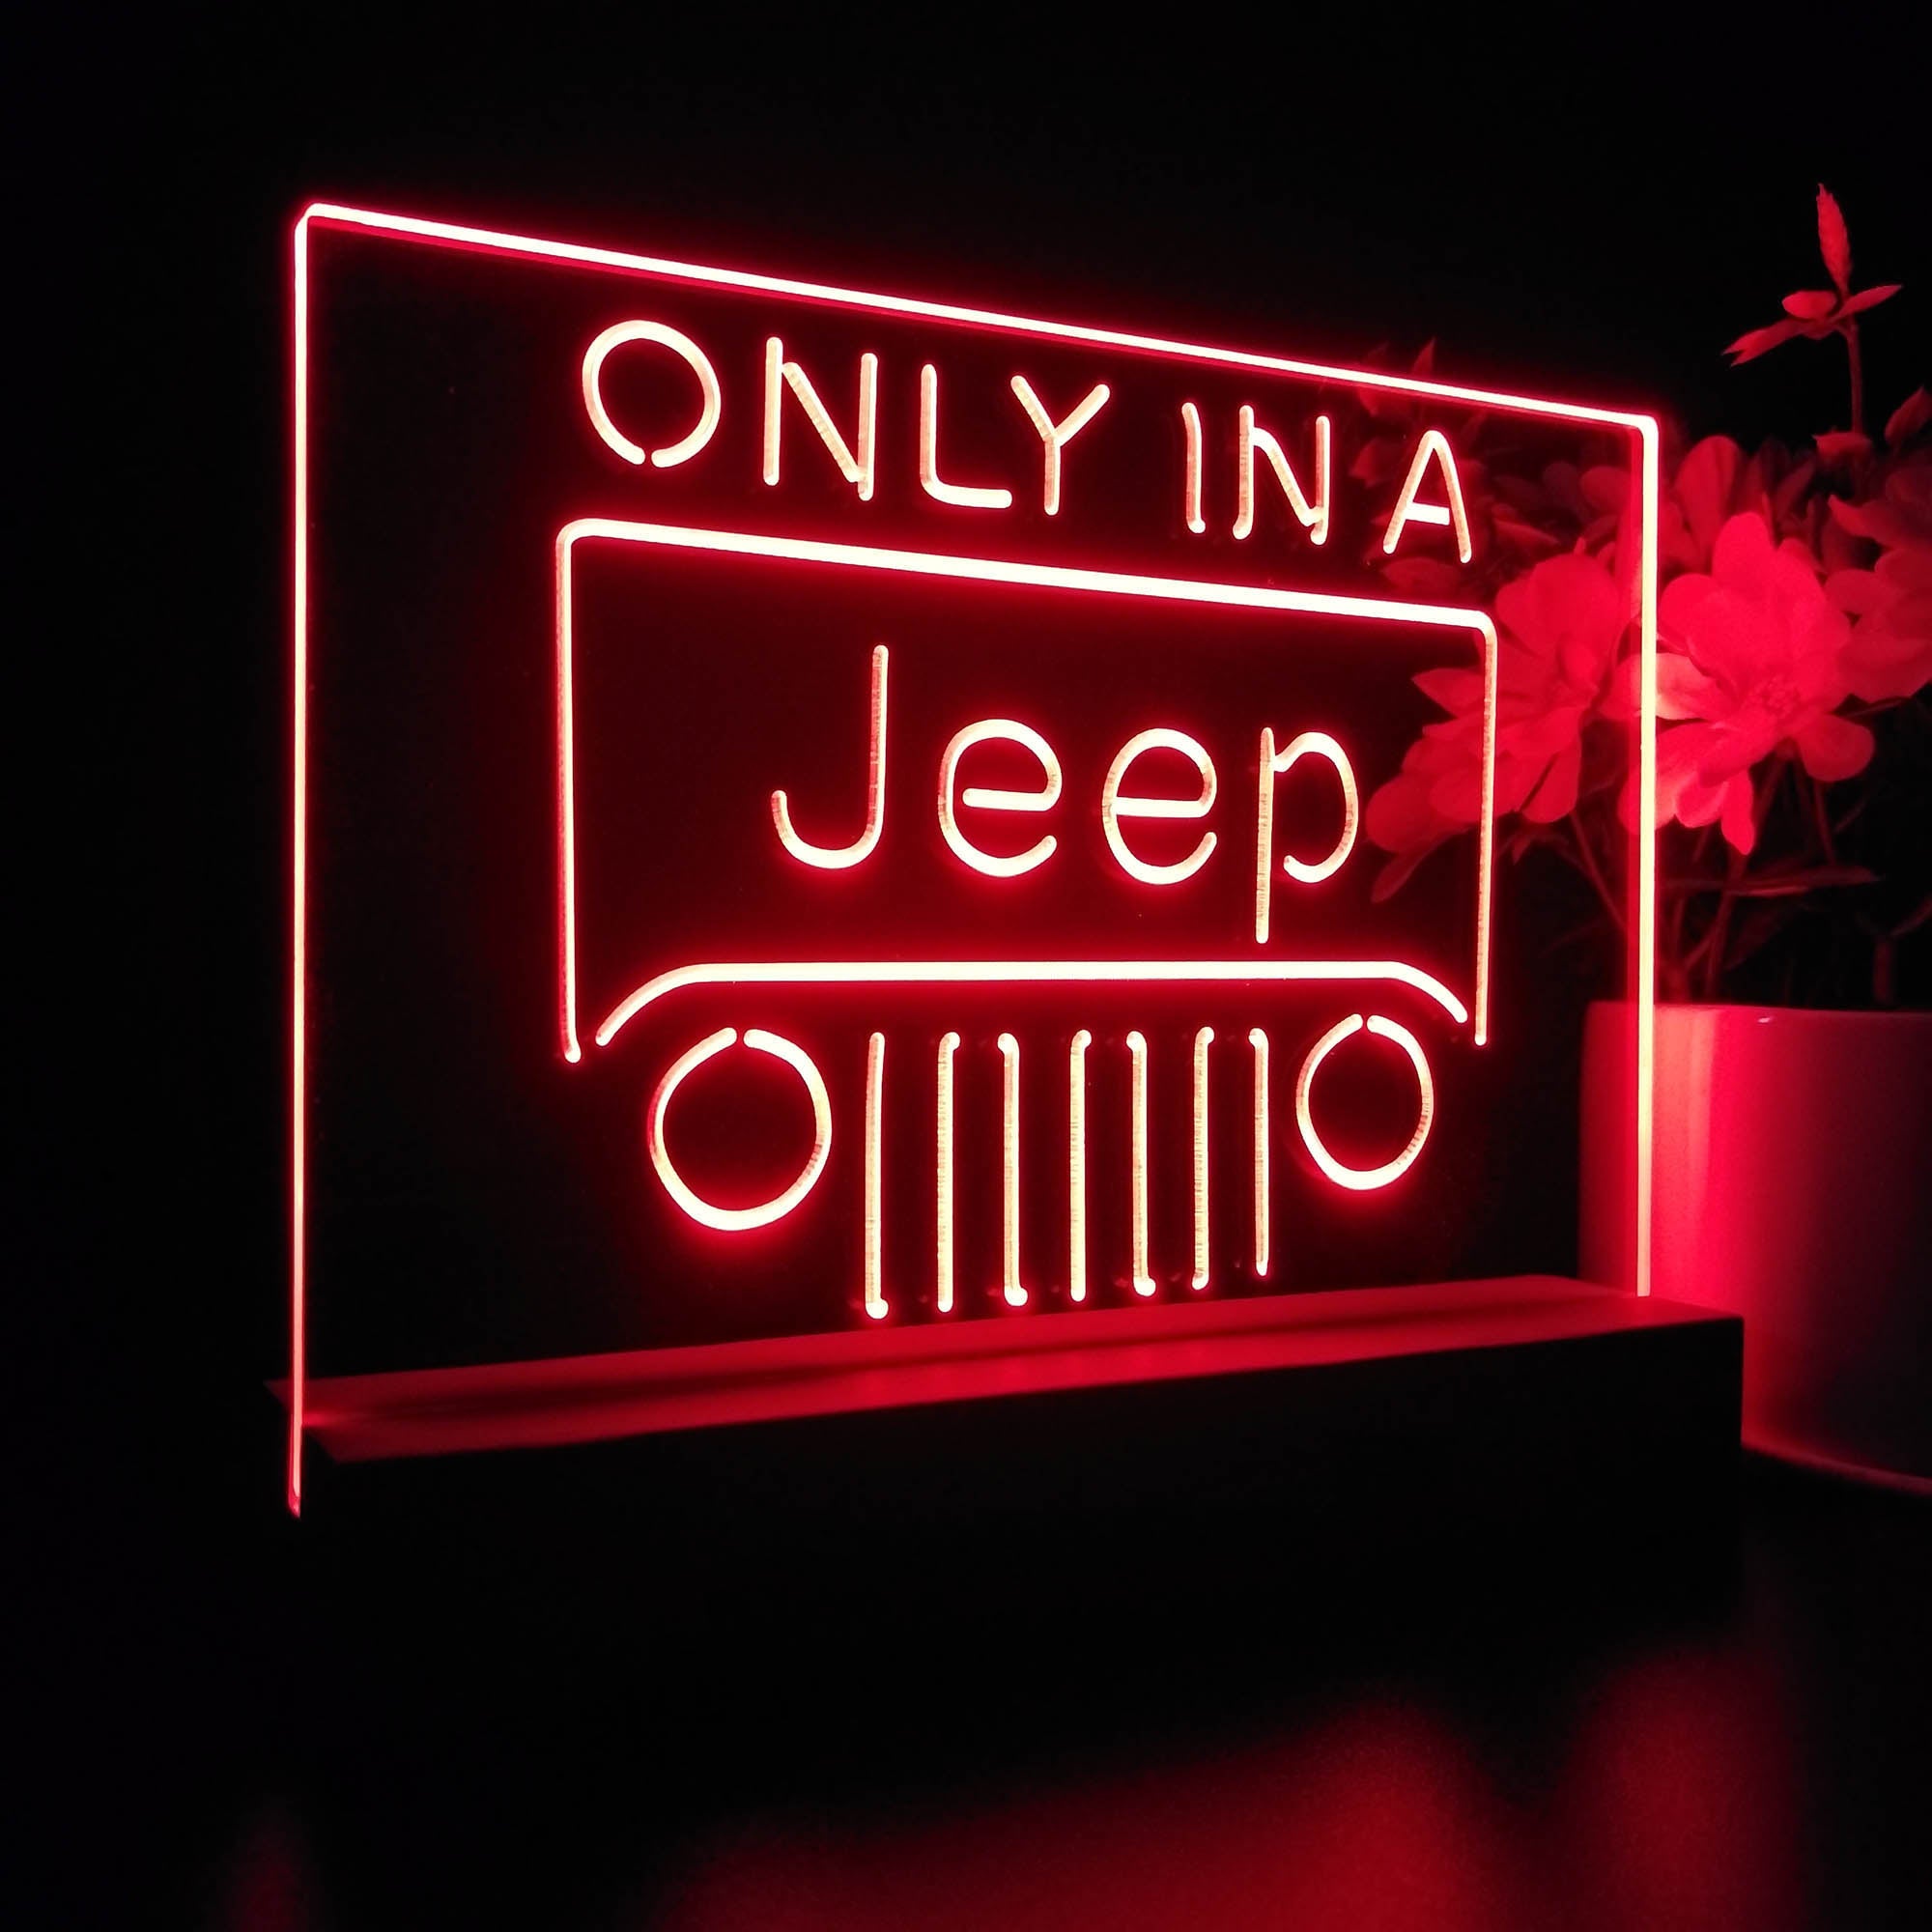 Only in a Jeep Beer Garage 3D LED Illusion Night Light